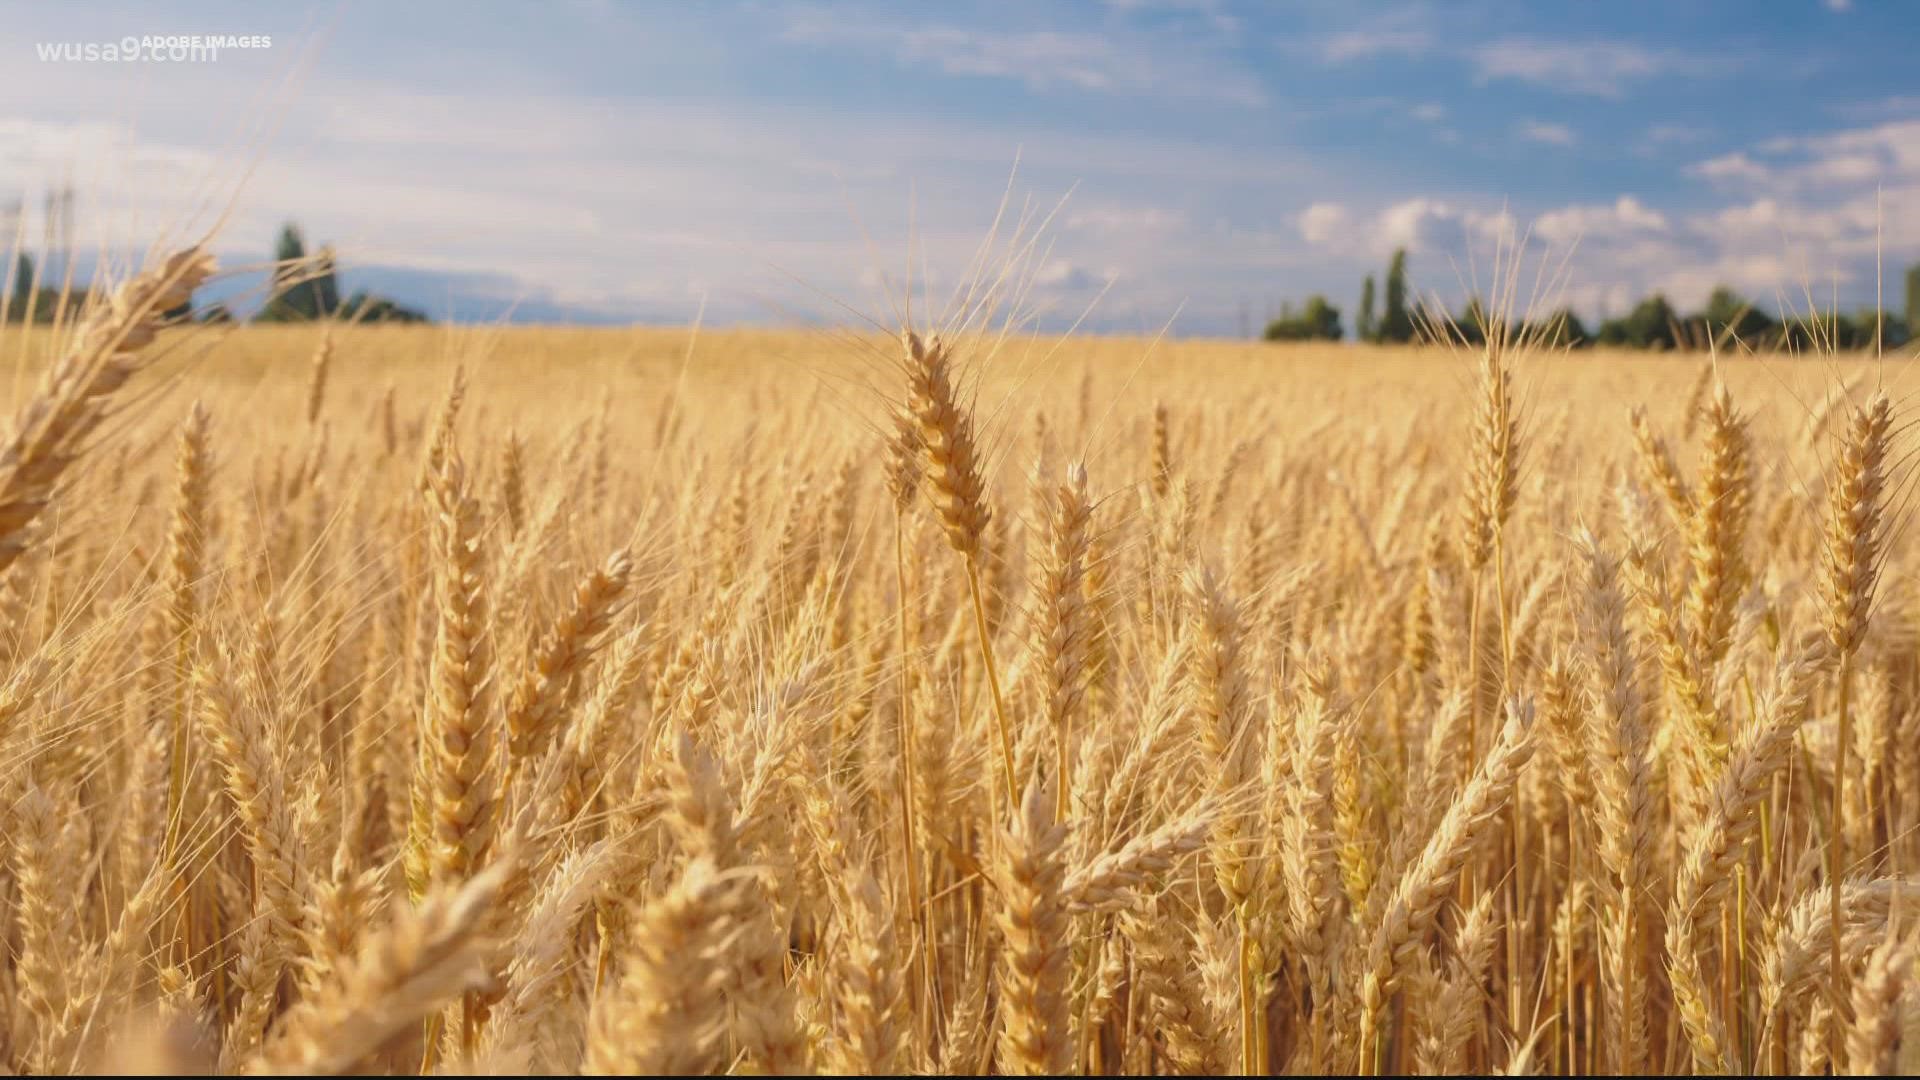 Russia and Ukraine are large contributers to the world's grain supply by making up nearly 35% of grain that's produced in the world.